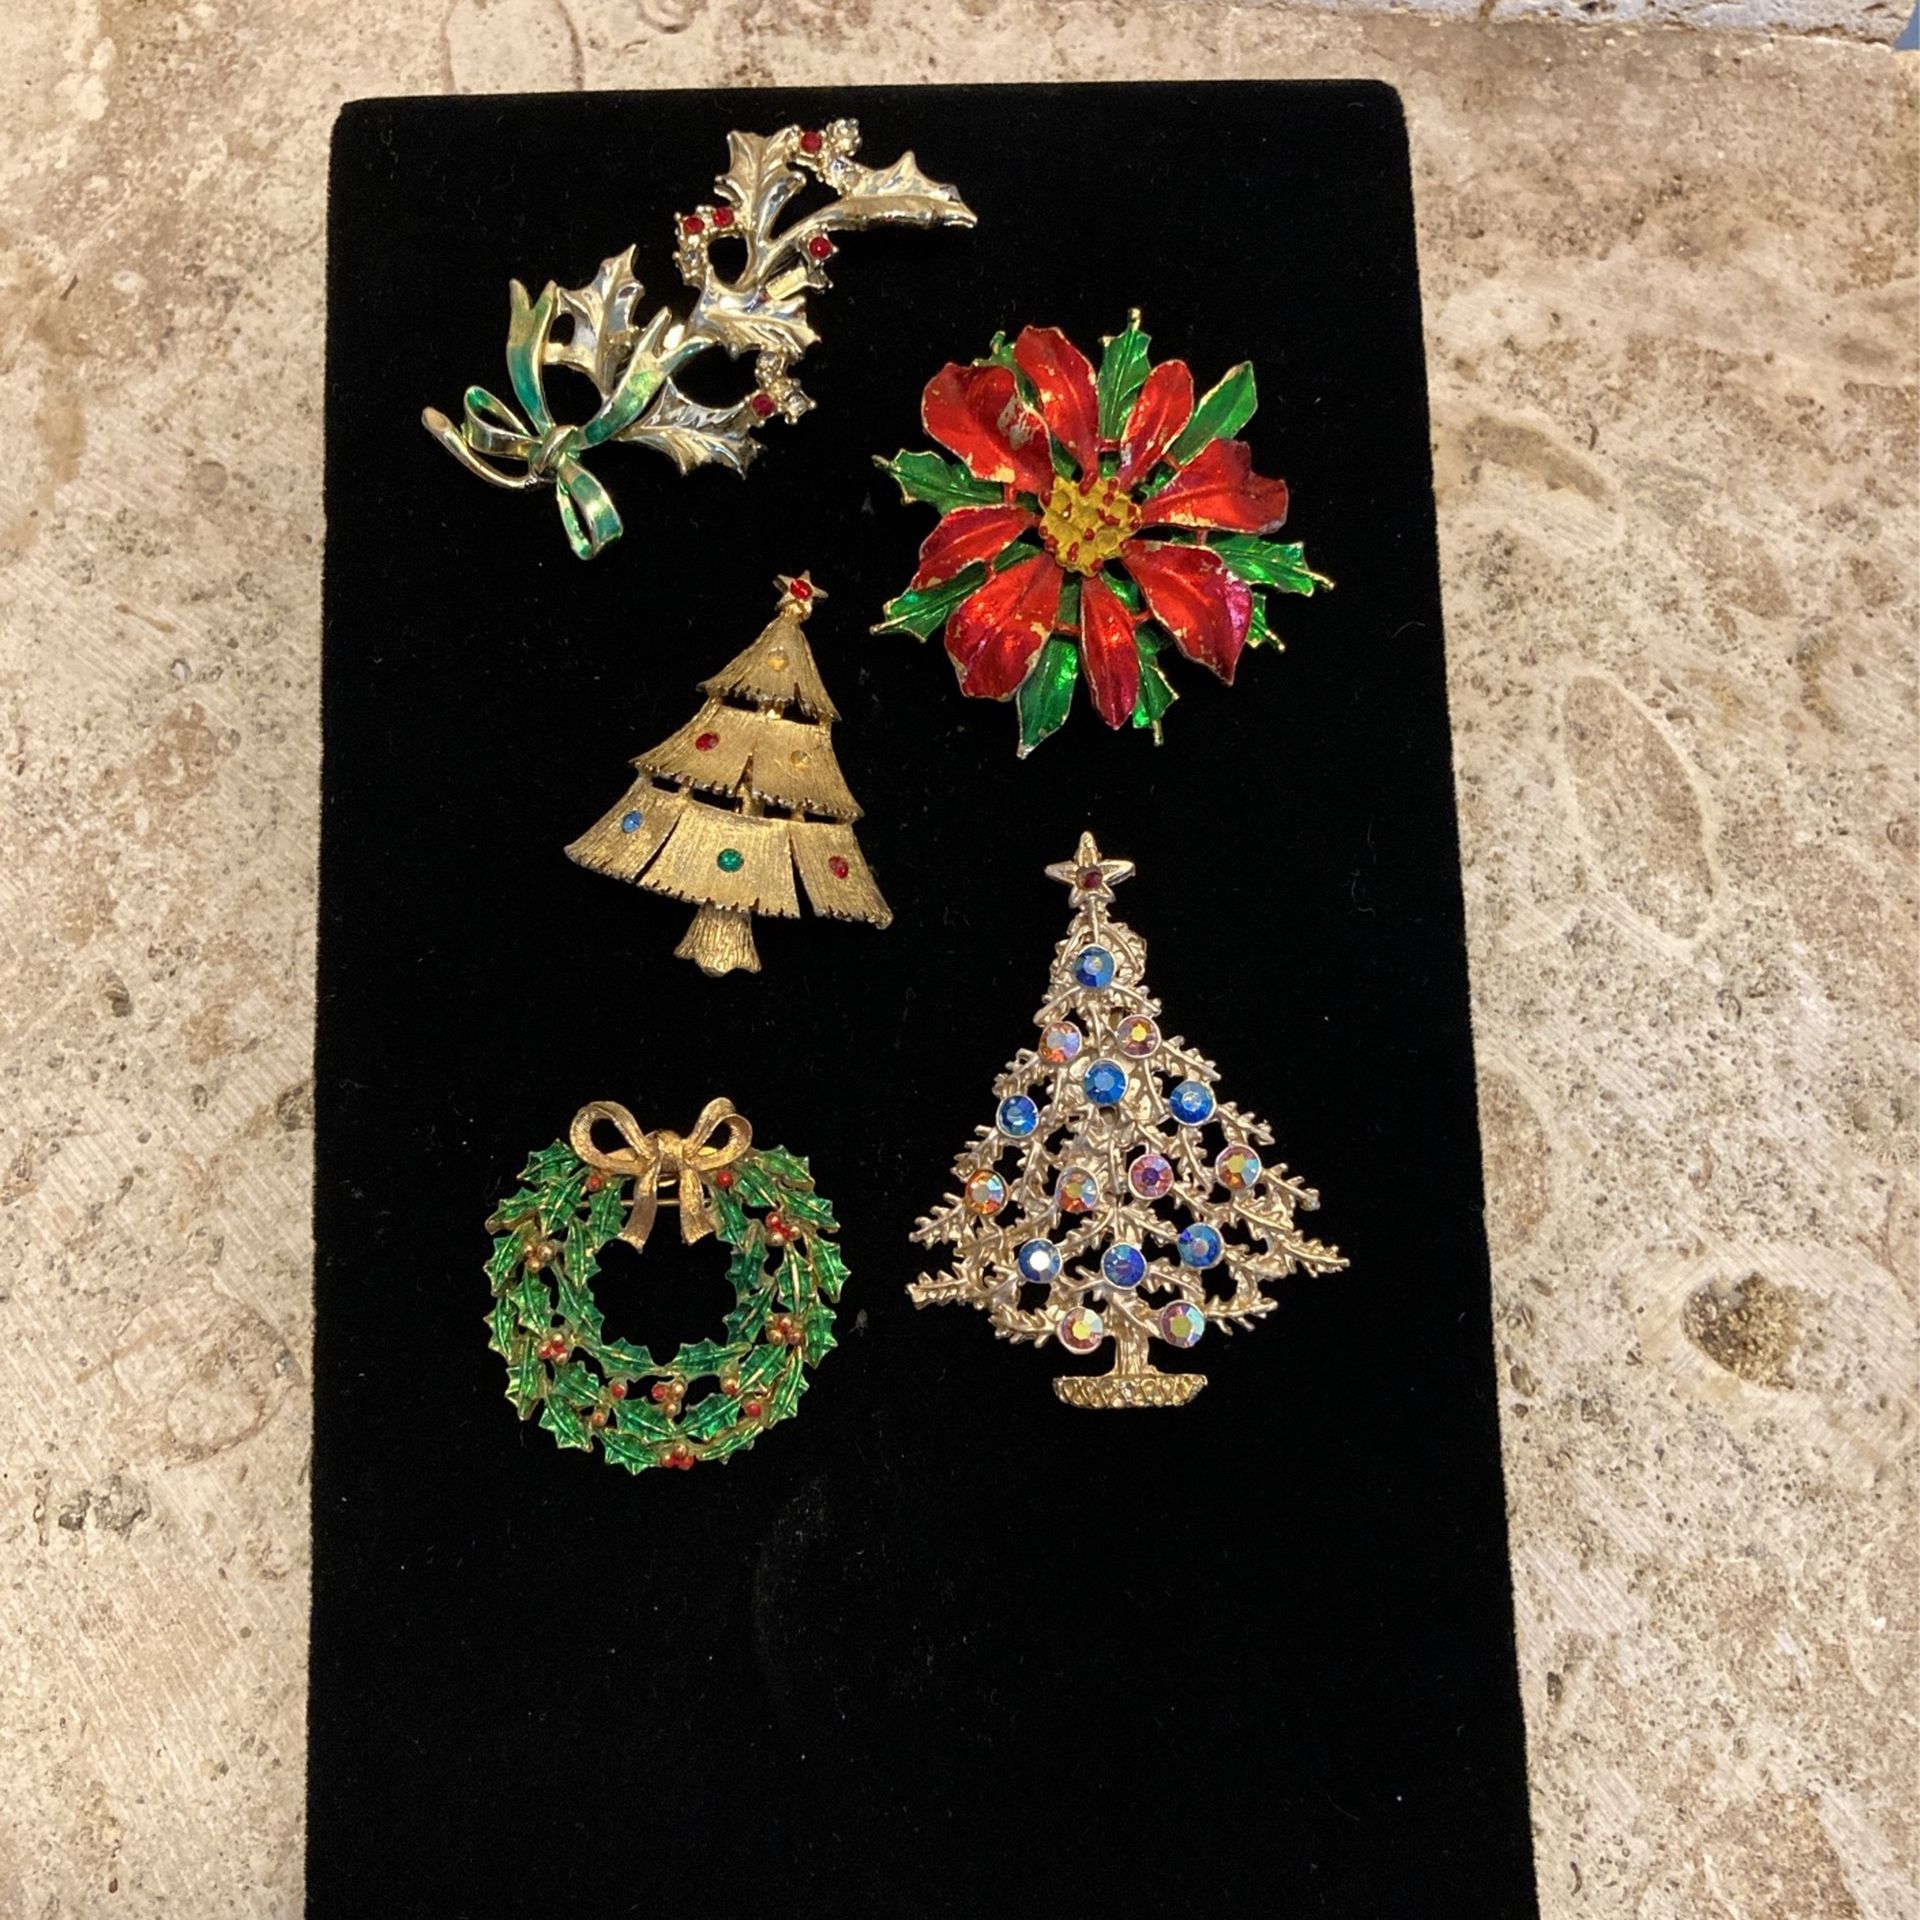 5 Holiday Brooches-XMas Pins- Christmas Brooches- All 5 For $5 As Is - #artssoflo